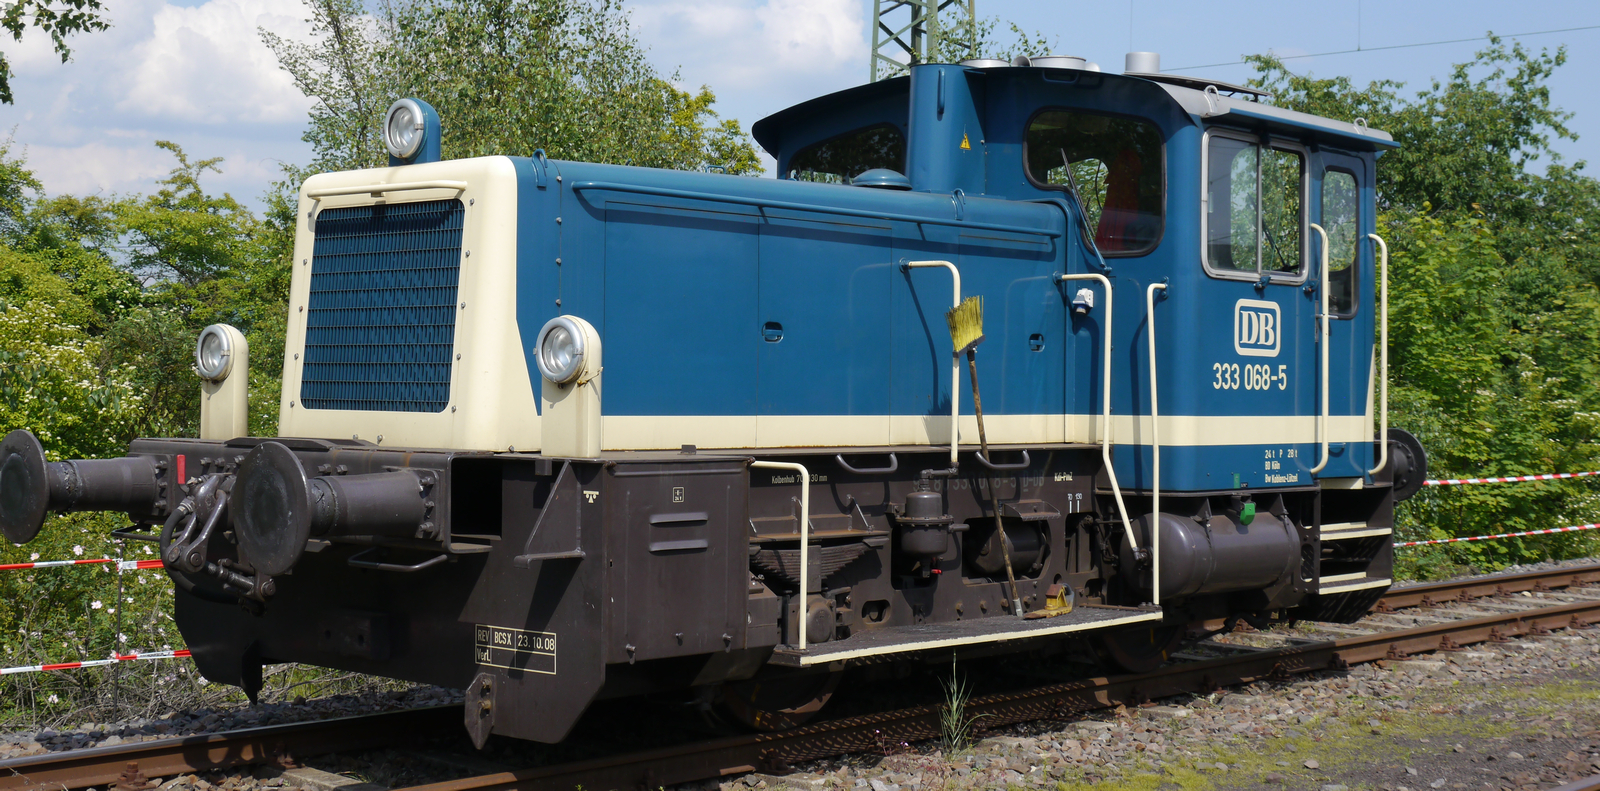 333 068 in Bundesbahn livery at the summer fair of the DB Museum Koblenz in June 2013